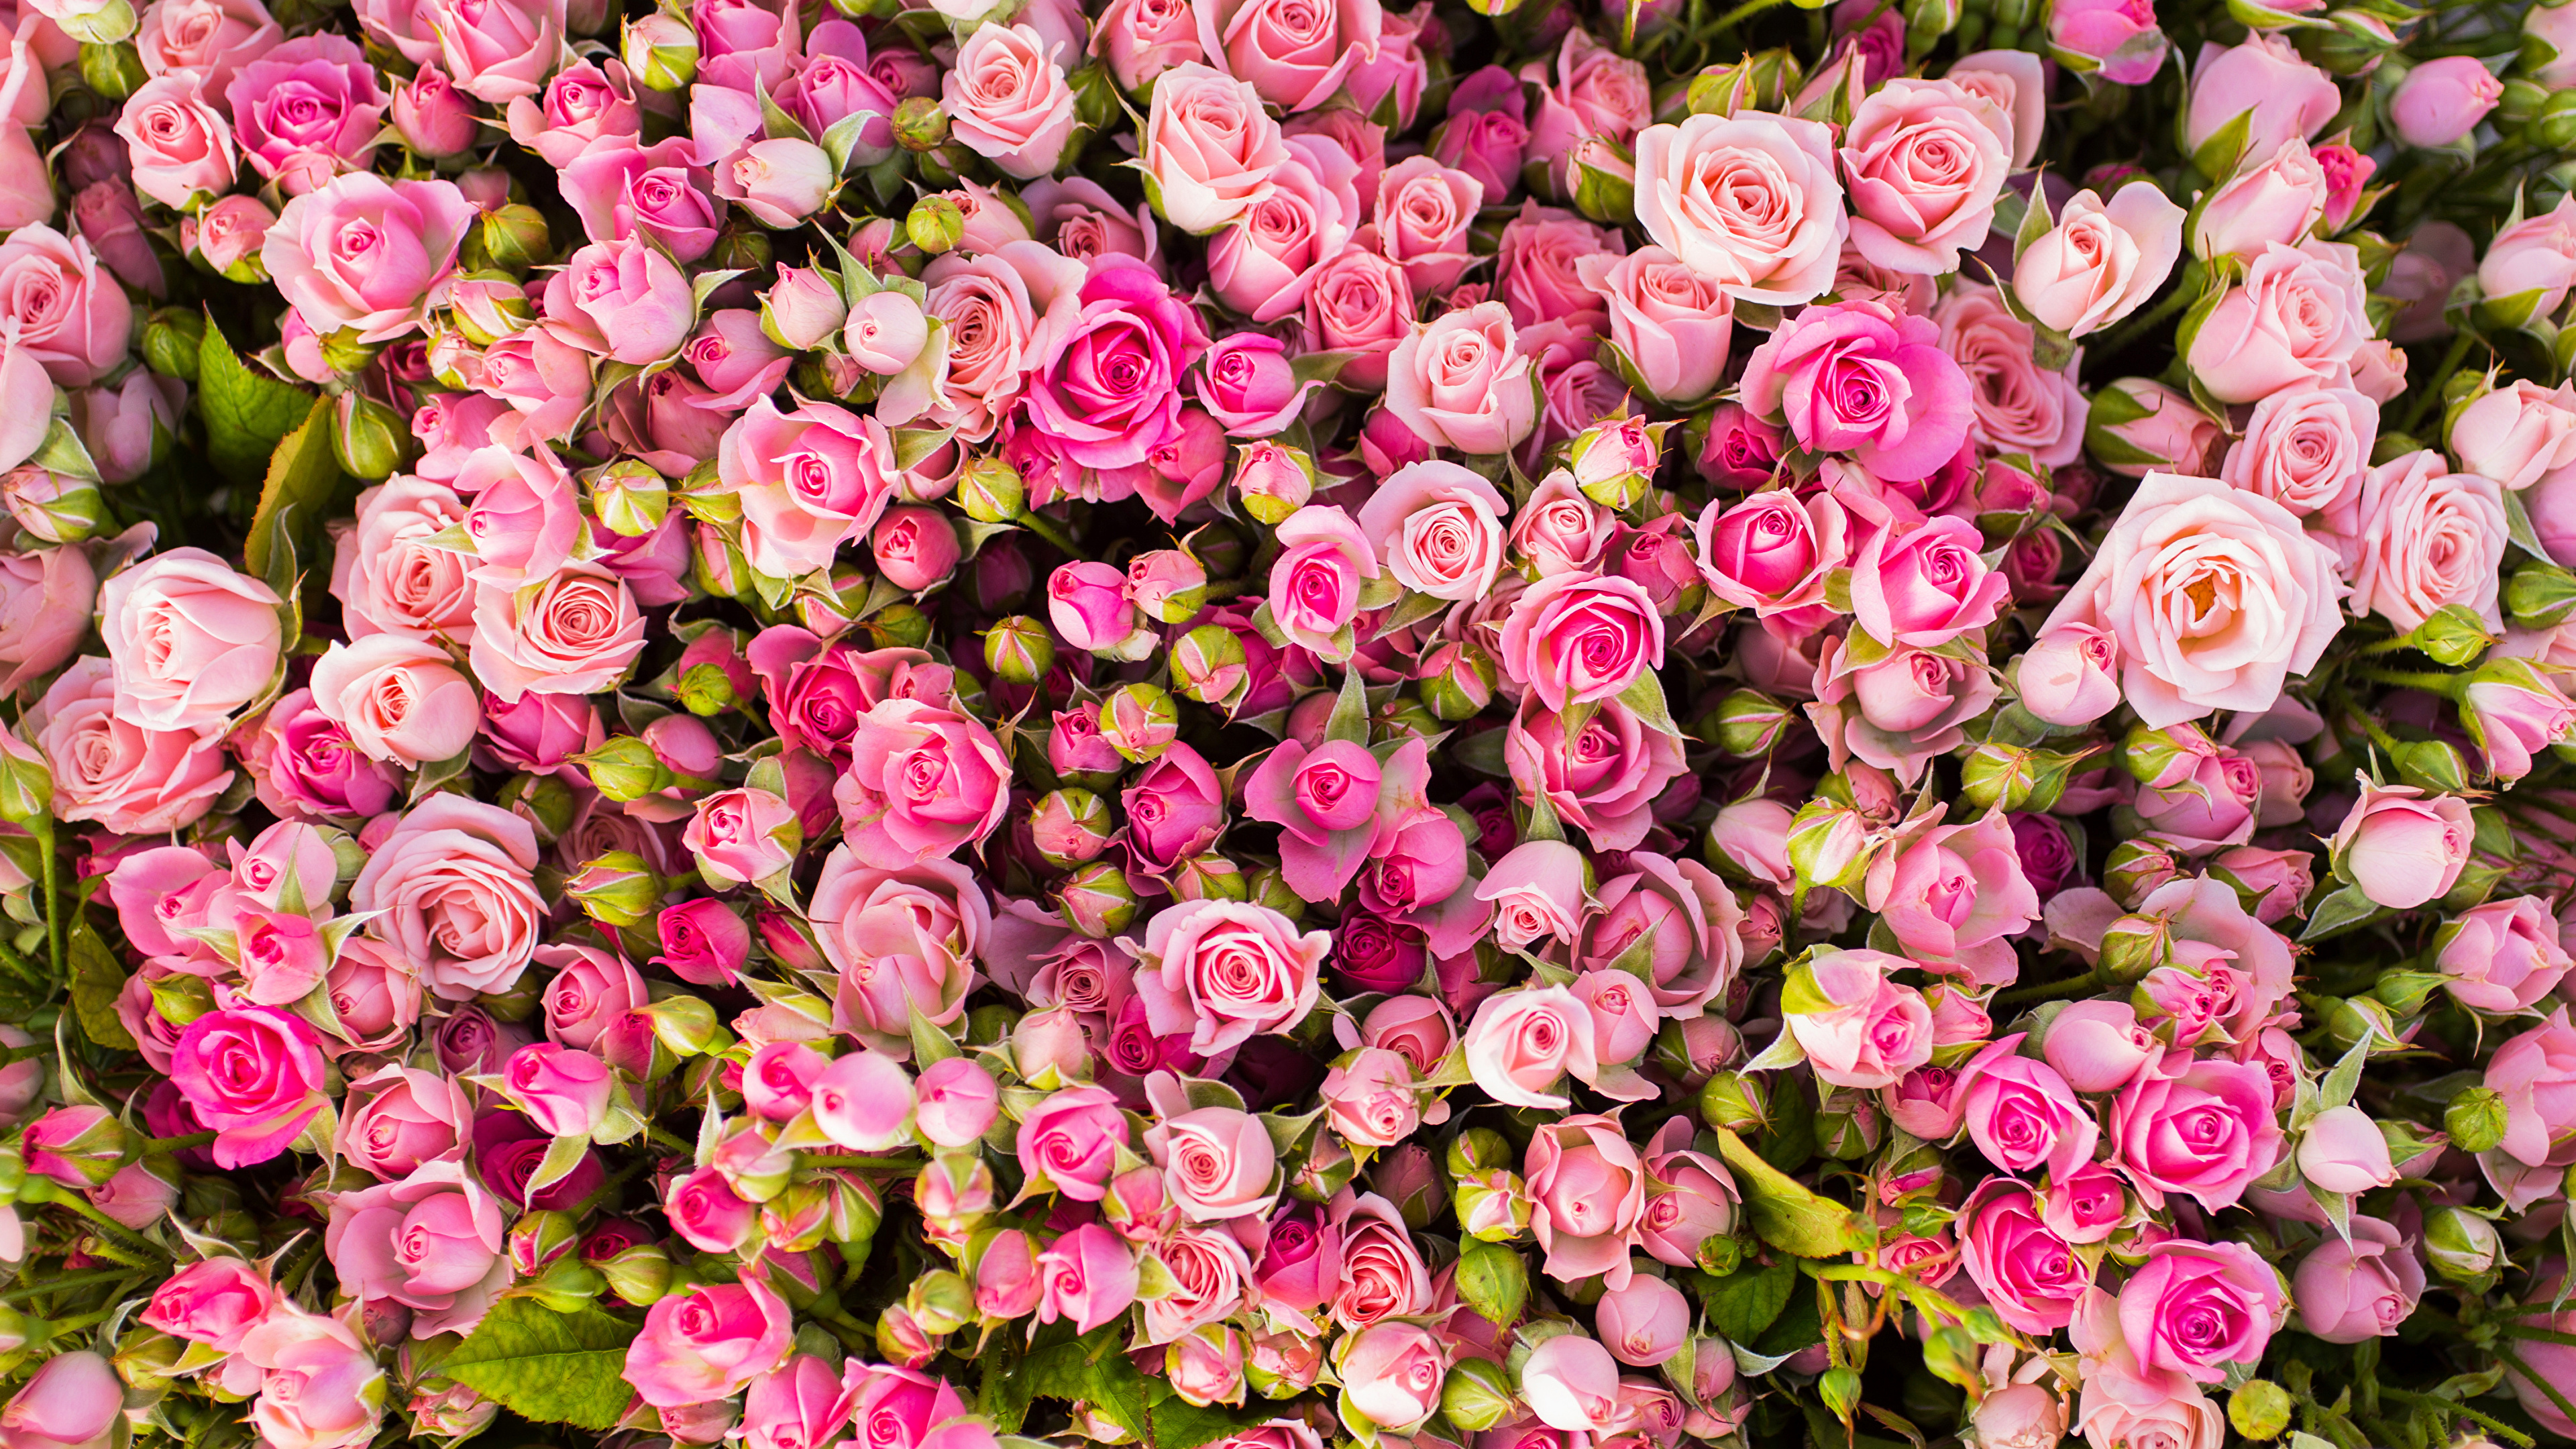 Roses_Many_Pink_color_512131_3840x2160.jpg